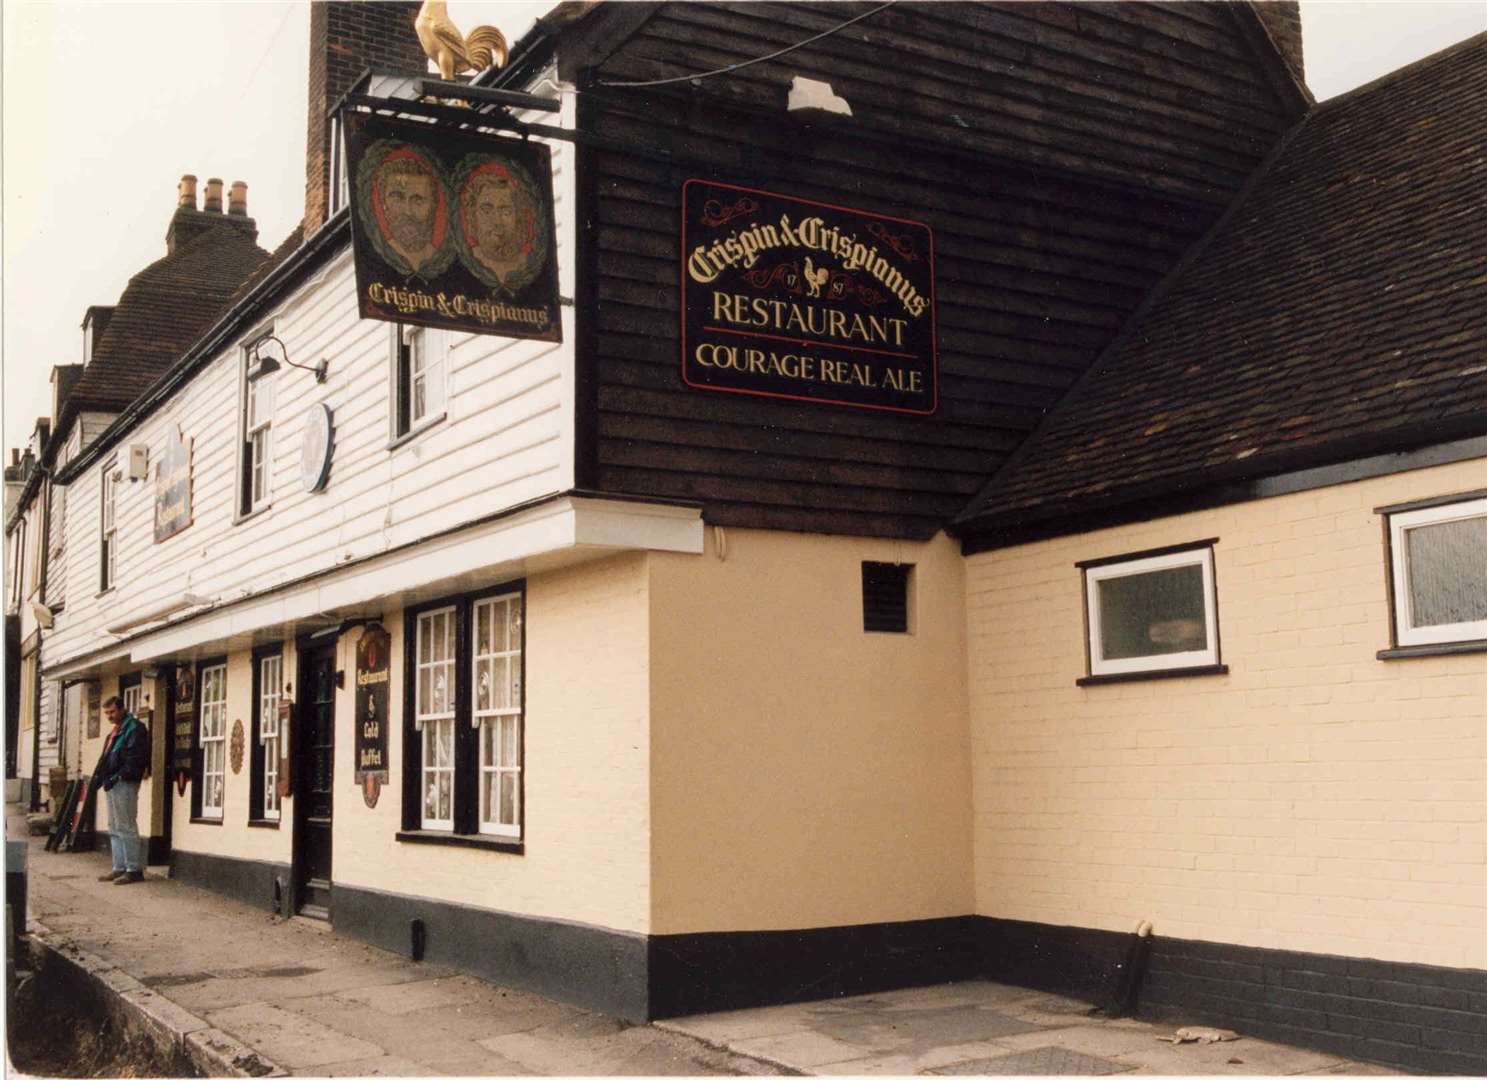 A picture of the Crispin and Crispianus in April 1992